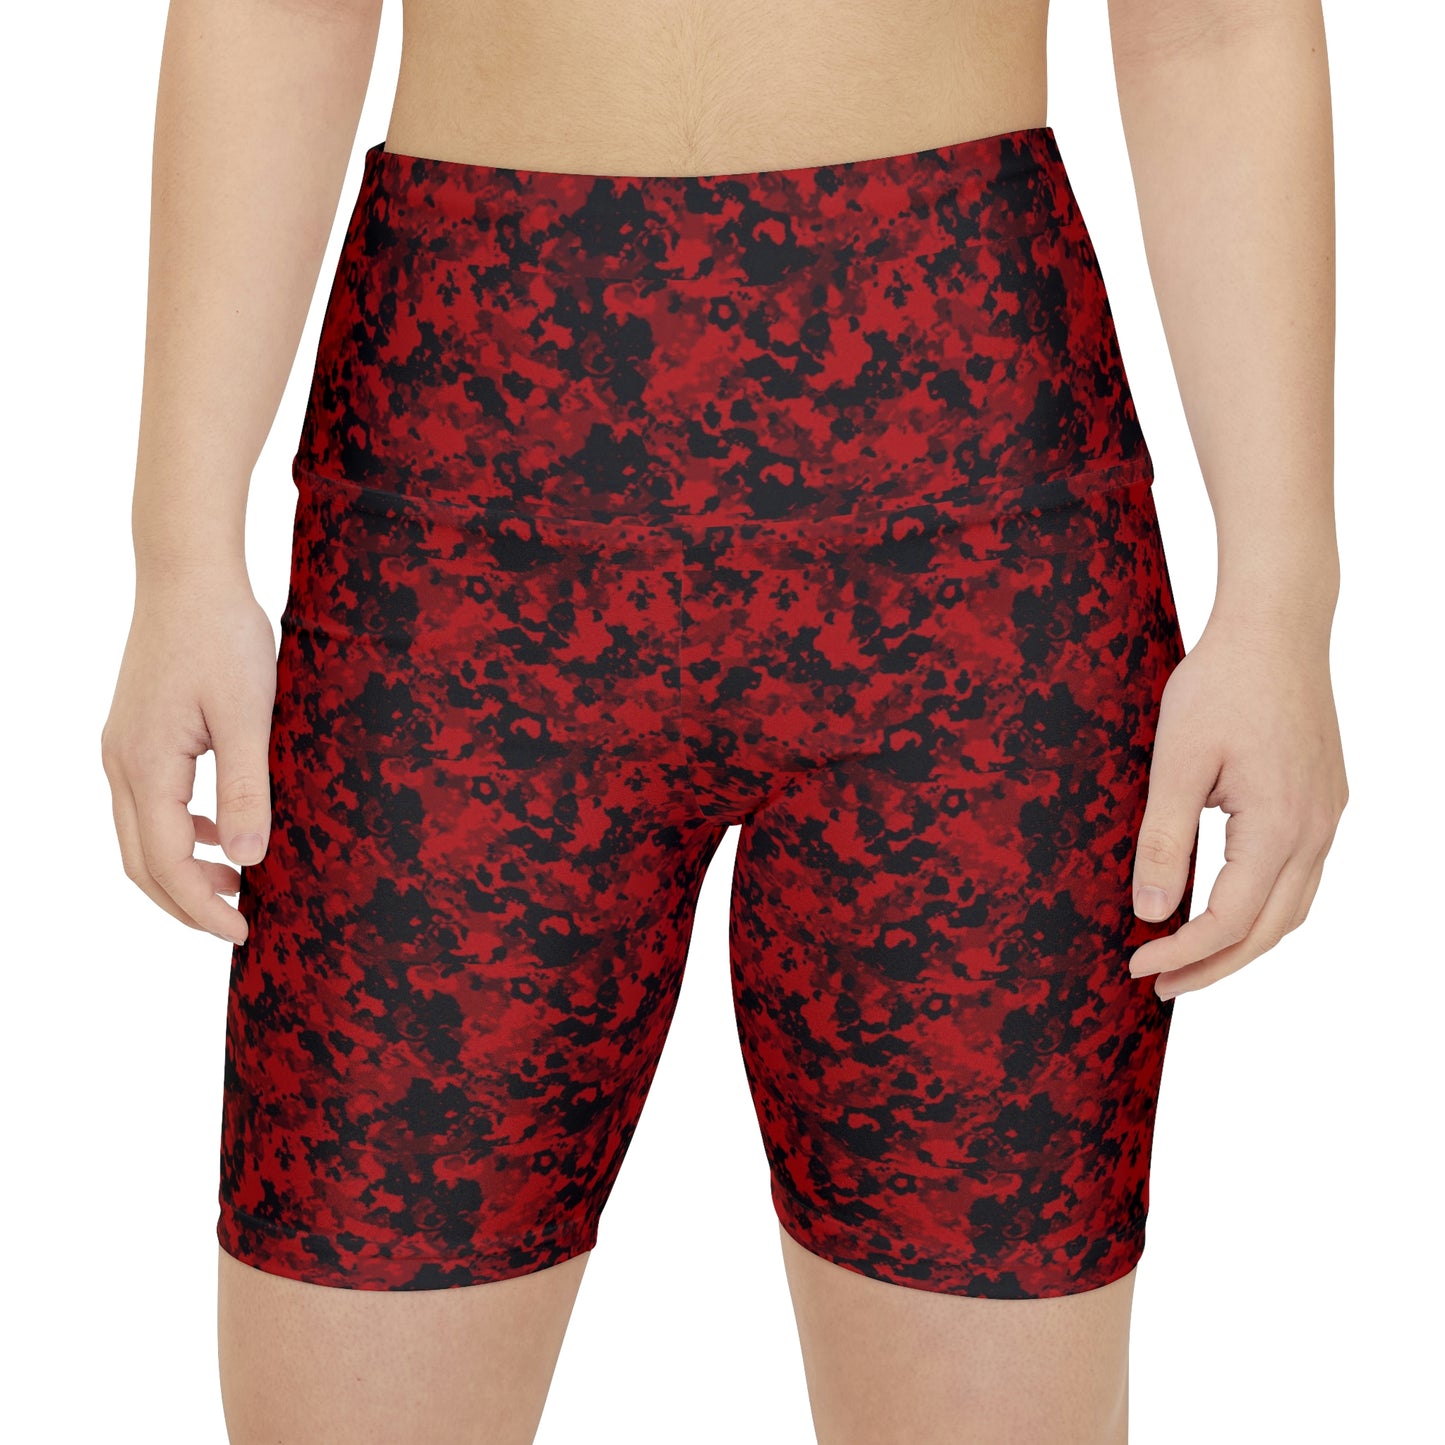 Workout Shorts - Camo (Black & Red)